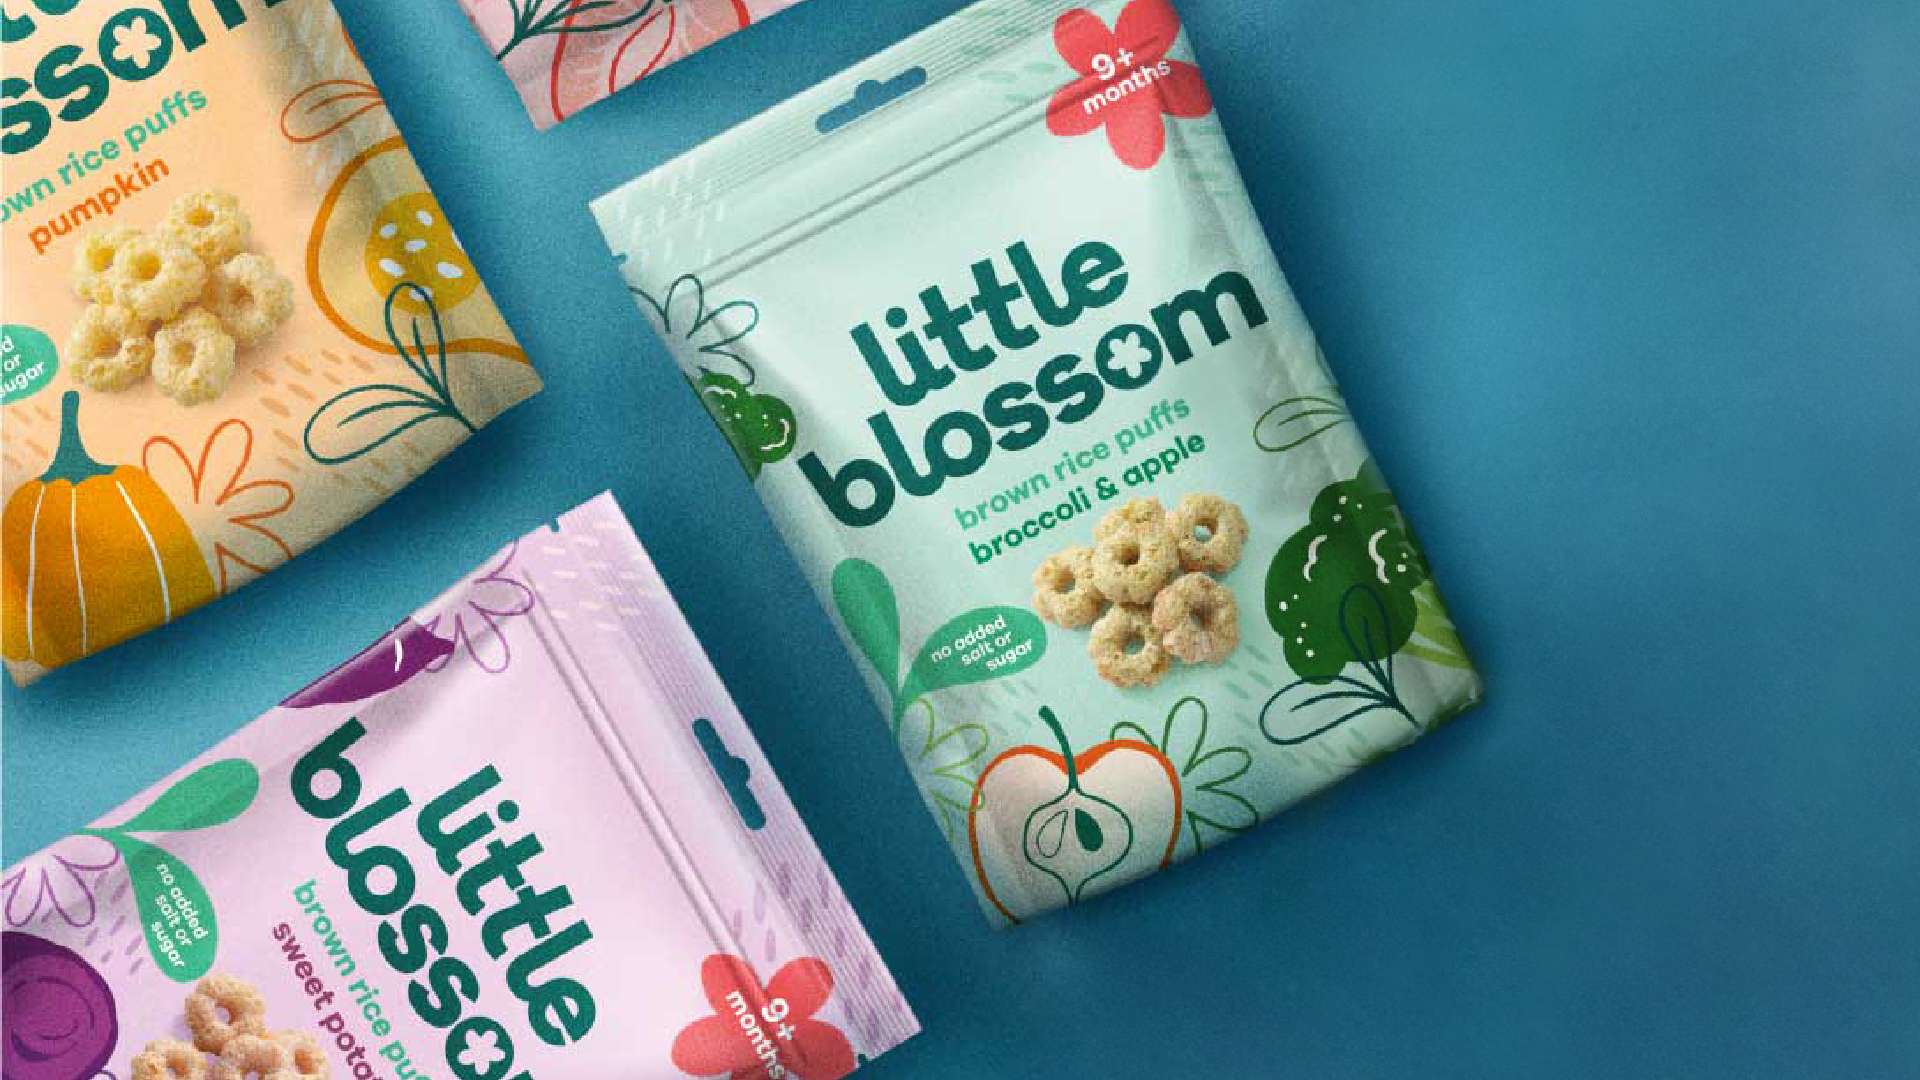 Little Blossom hero image featuring a selection of Little Blossom baby food packets